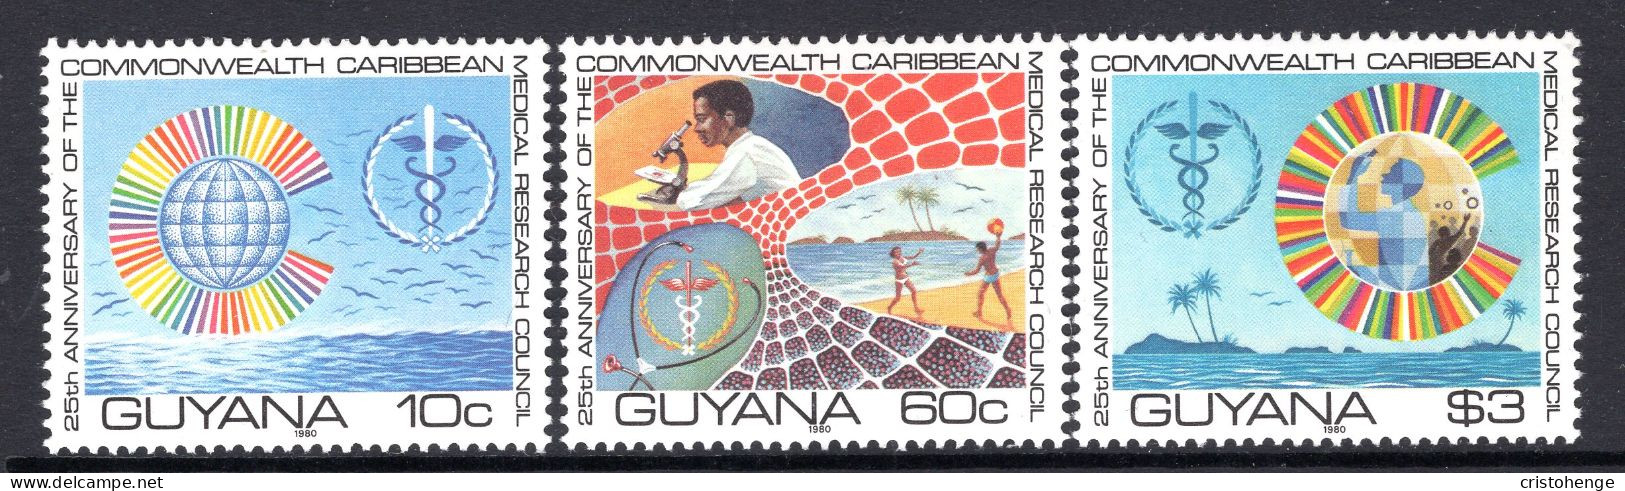 Guyana 1980 25th Anniversray Of Commonweath Caribbean Medical Research Council Set HM (SG 749-751) - Guyana (1966-...)